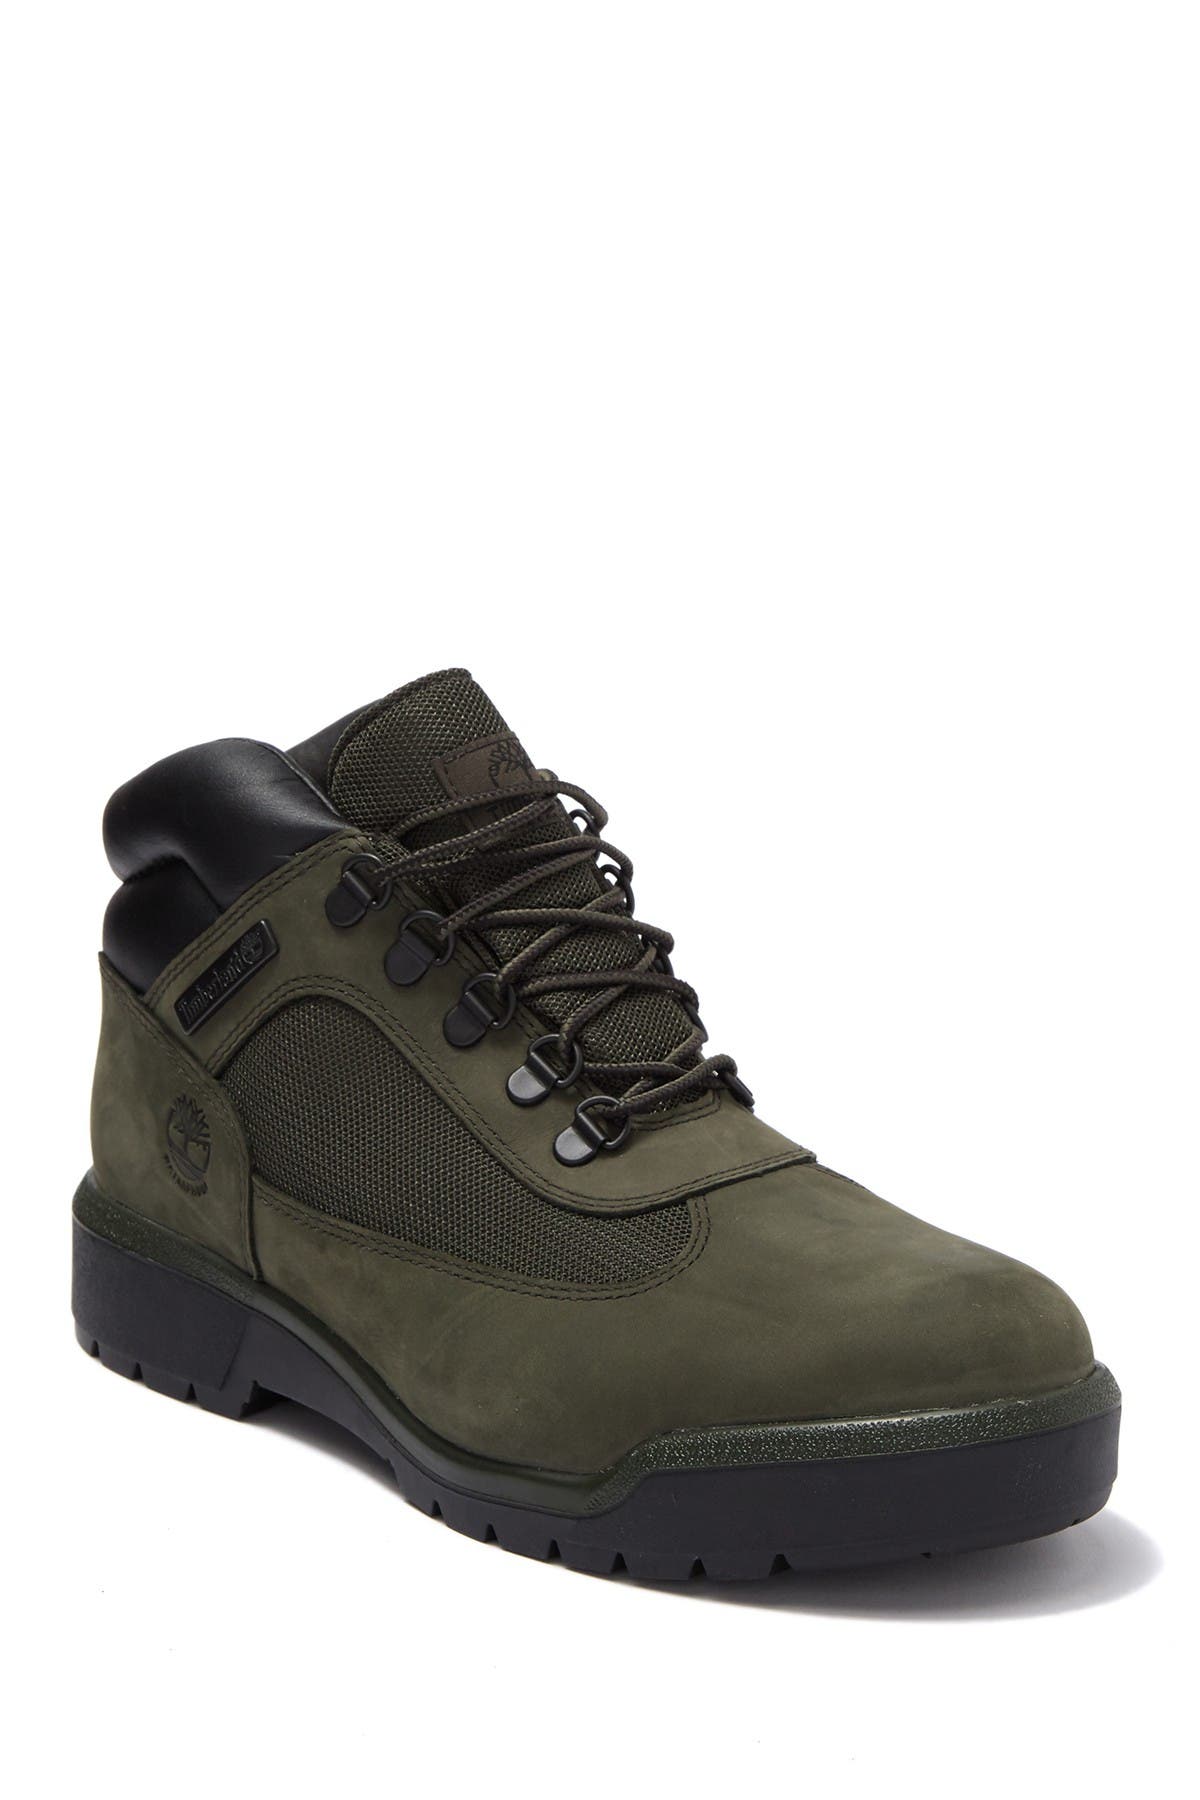 olive green timberland field boots